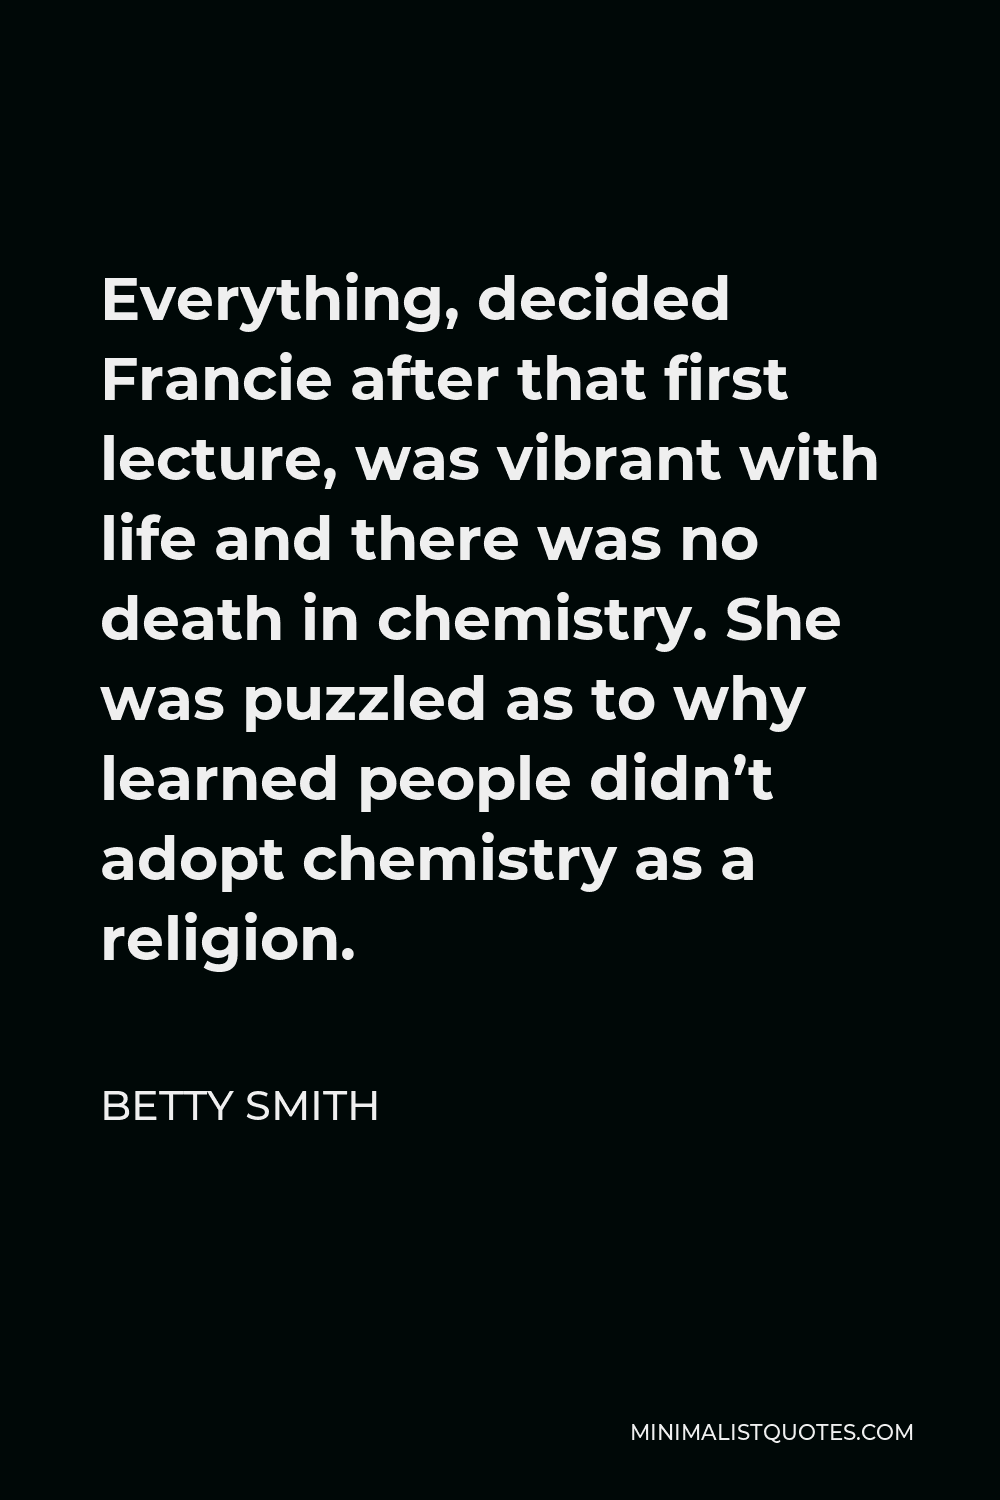 Betty Smith Quote - Everything, decided Francie after that first lecture, was vibrant with life and there was no death in chemistry. She was puzzled as to why learned people didn’t adopt chemistry as a religion.